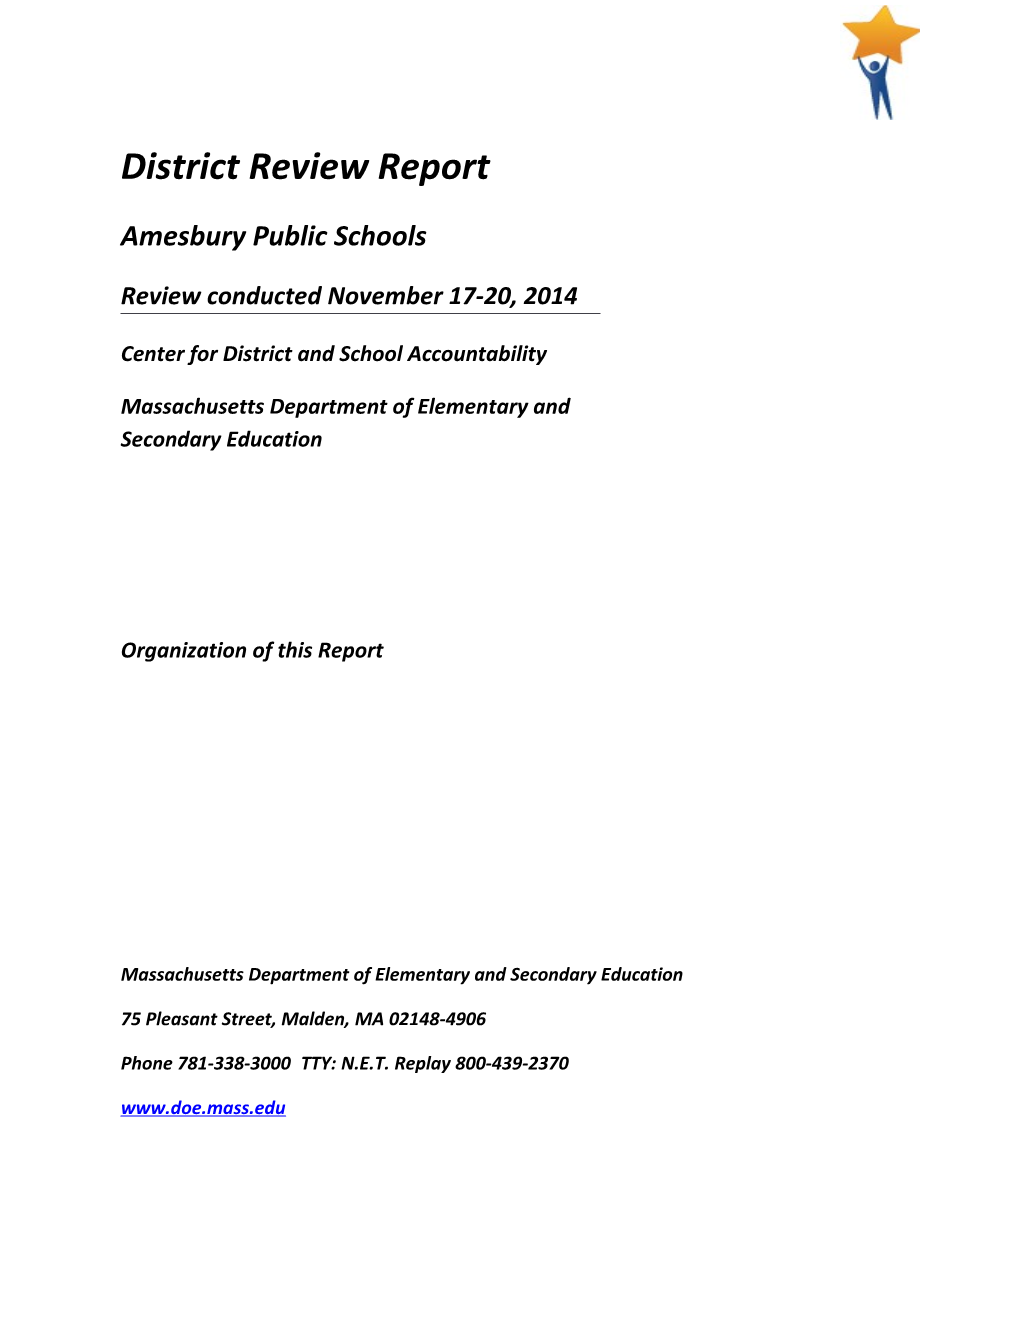 Amesbury District Review Report, 2014